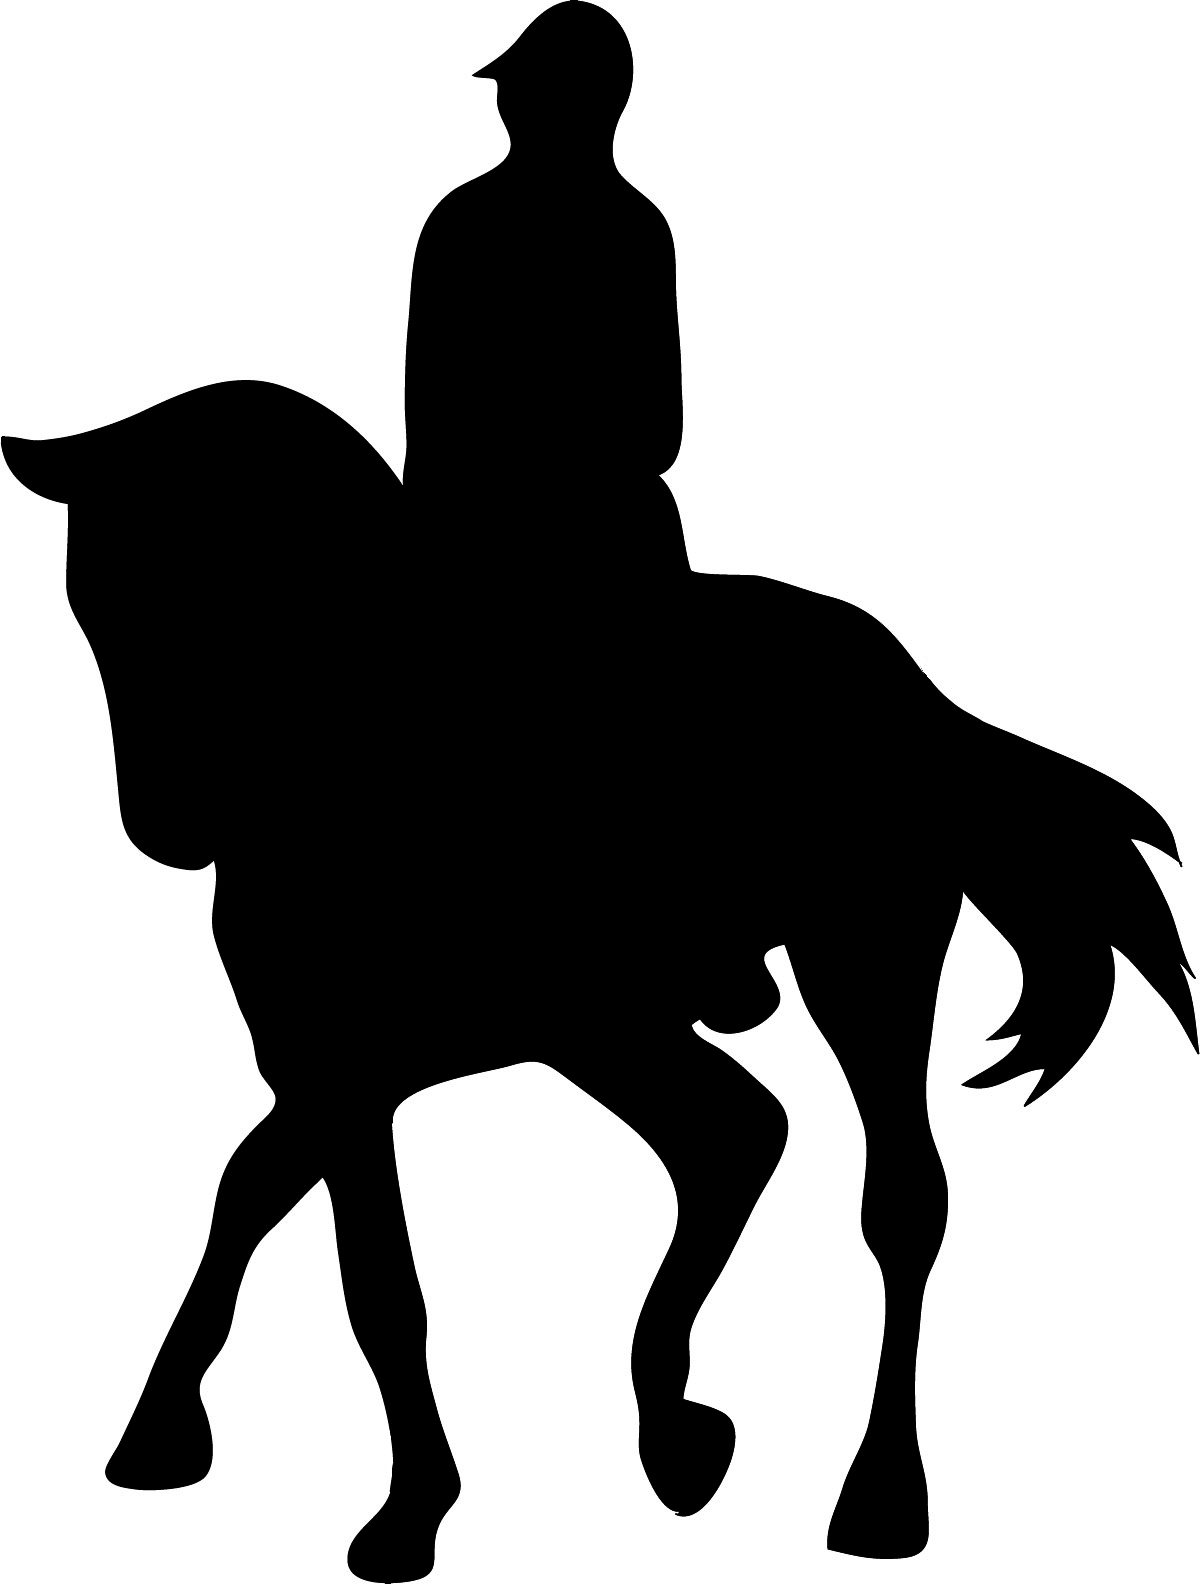 free clip art horse and rider silhouette - photo #26